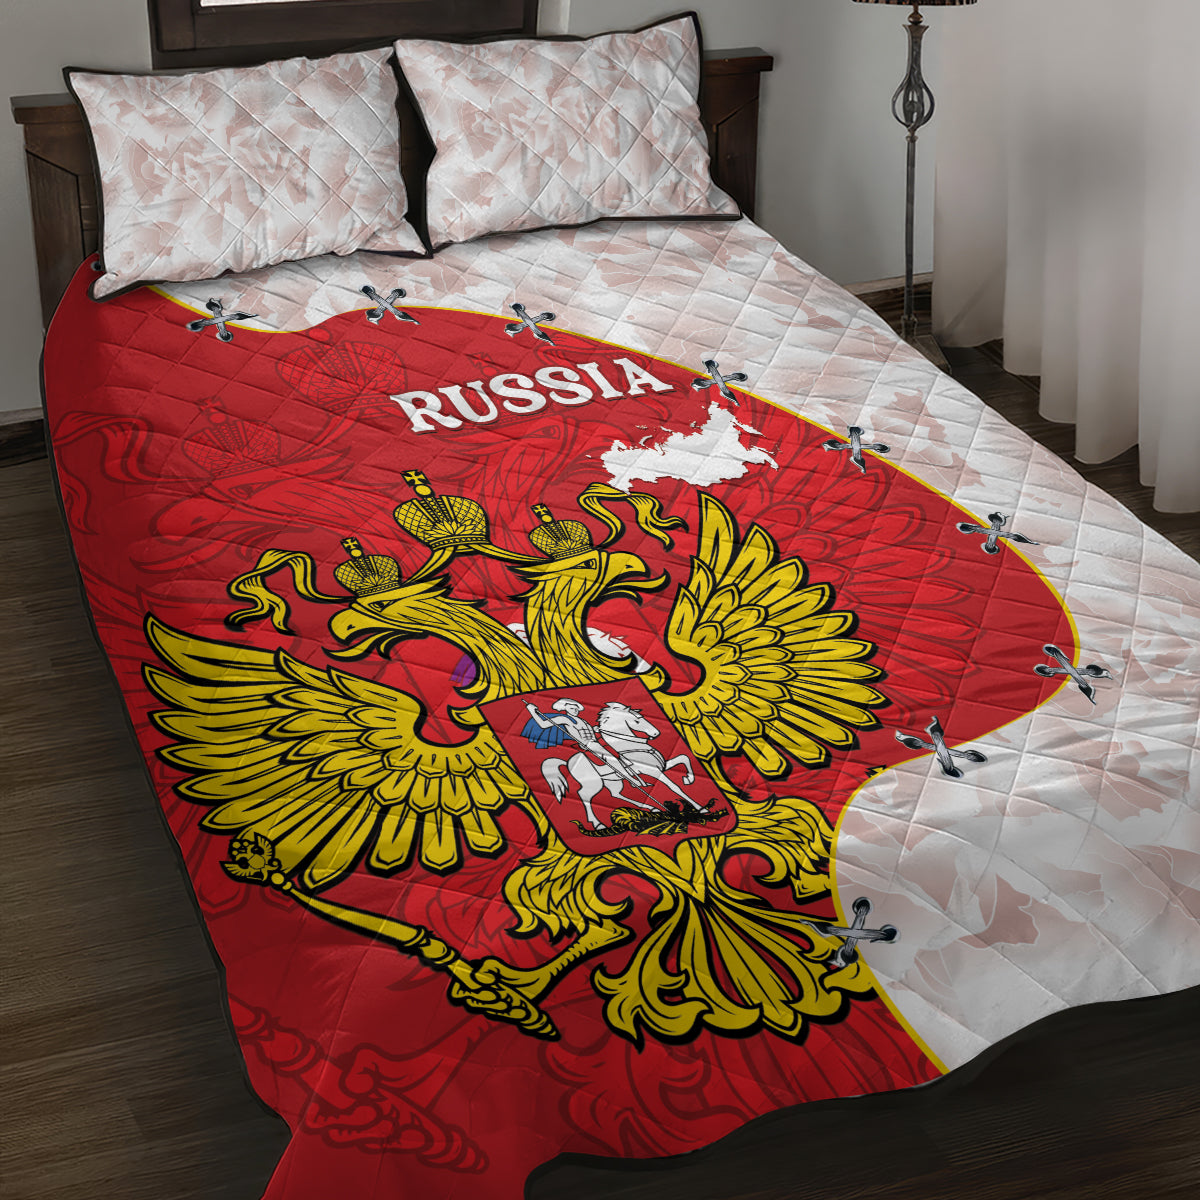 Russia Independence Day Quilt Bed Set Coat Of Arms With Map